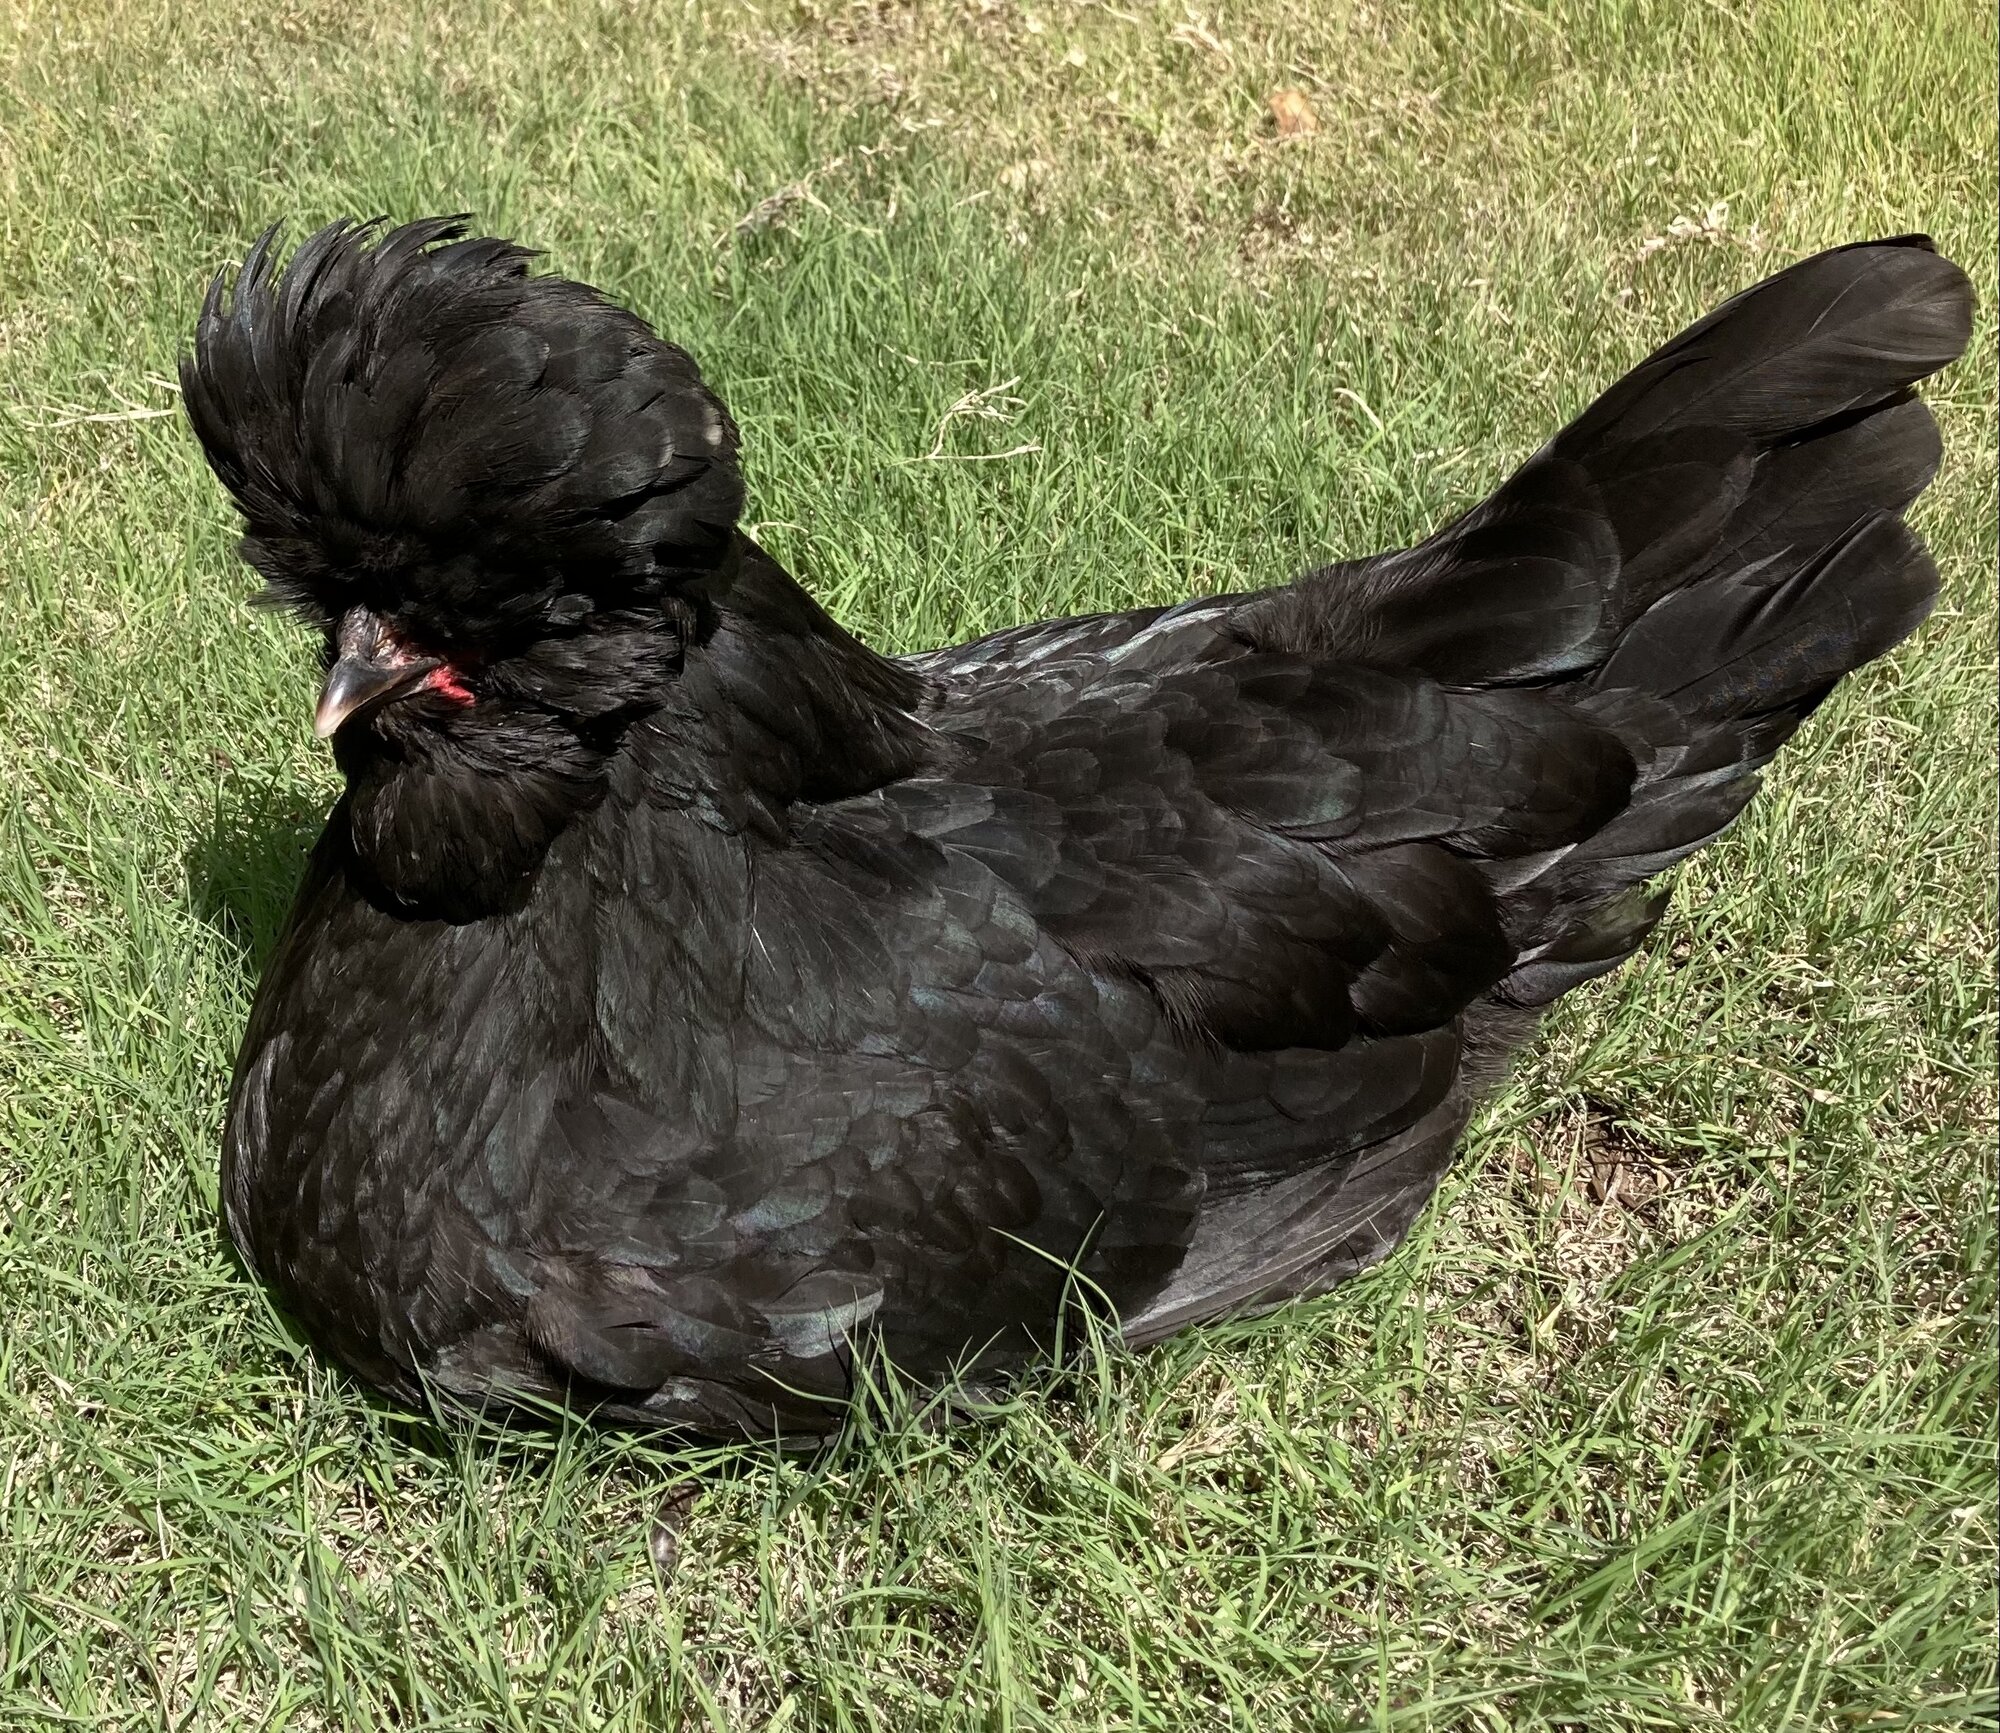 Variety of chicken breeds including black, Polish, and blue egg-laying chickens